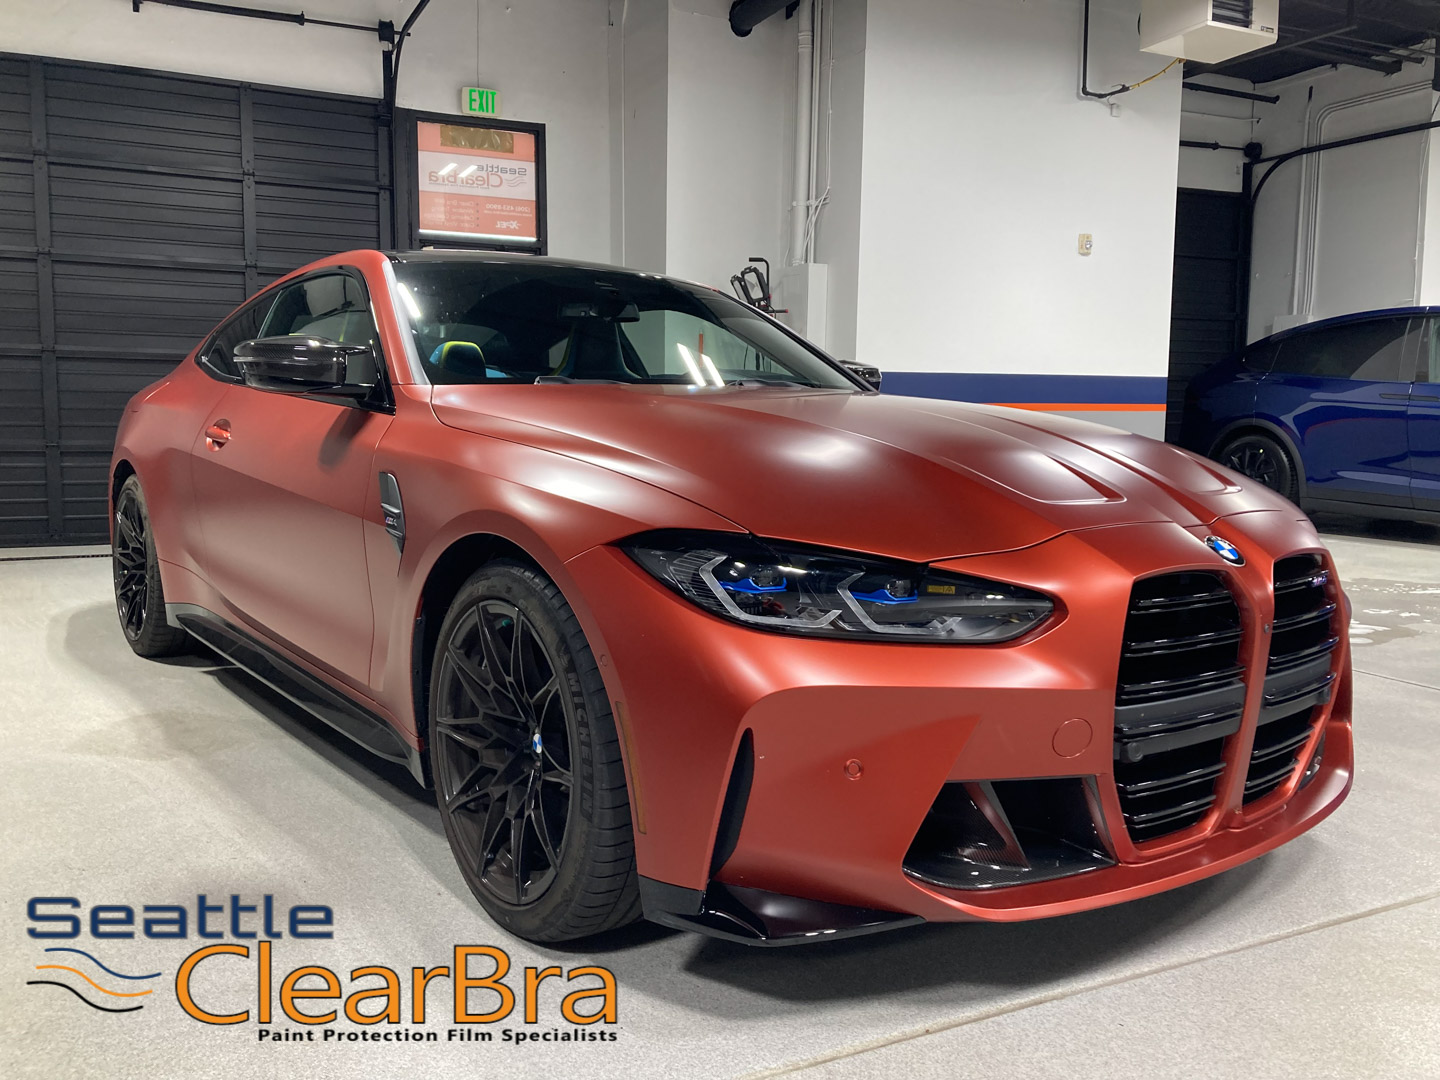 BMW M4 Xpel STEALTH Paint Protection Film - Seattle ClearBra